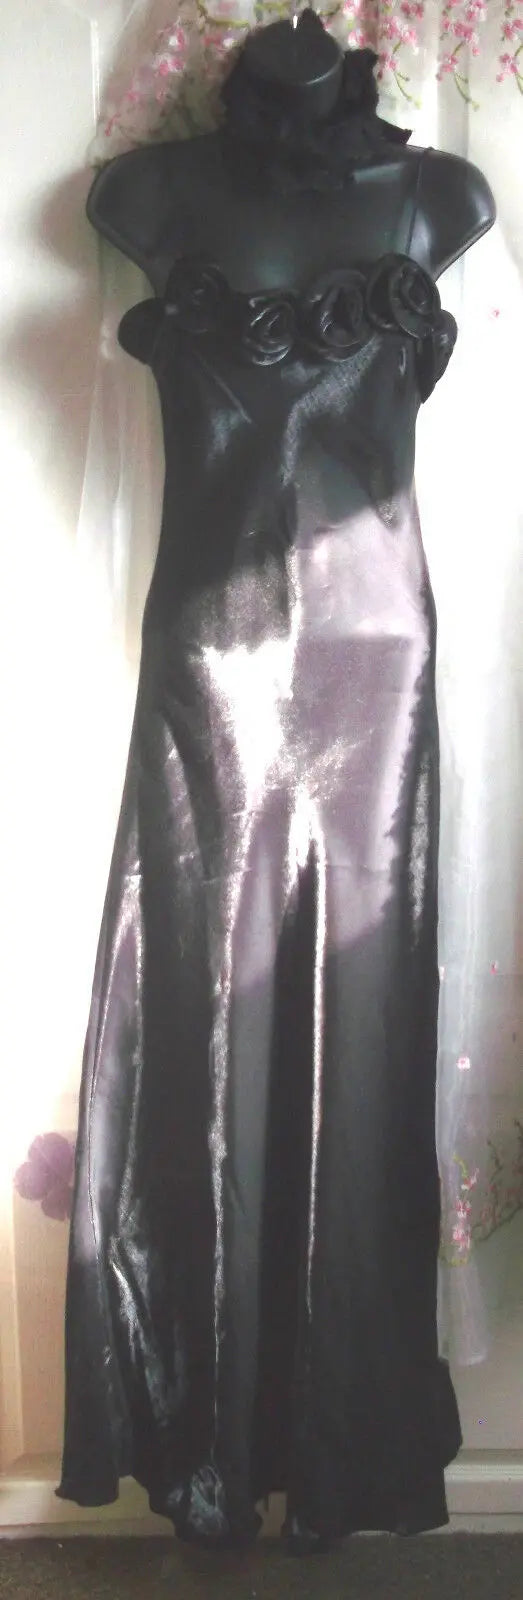 Gothic black satin full length ball gown with satin roses on bodice. Size 8 /10 Lautinel Paris